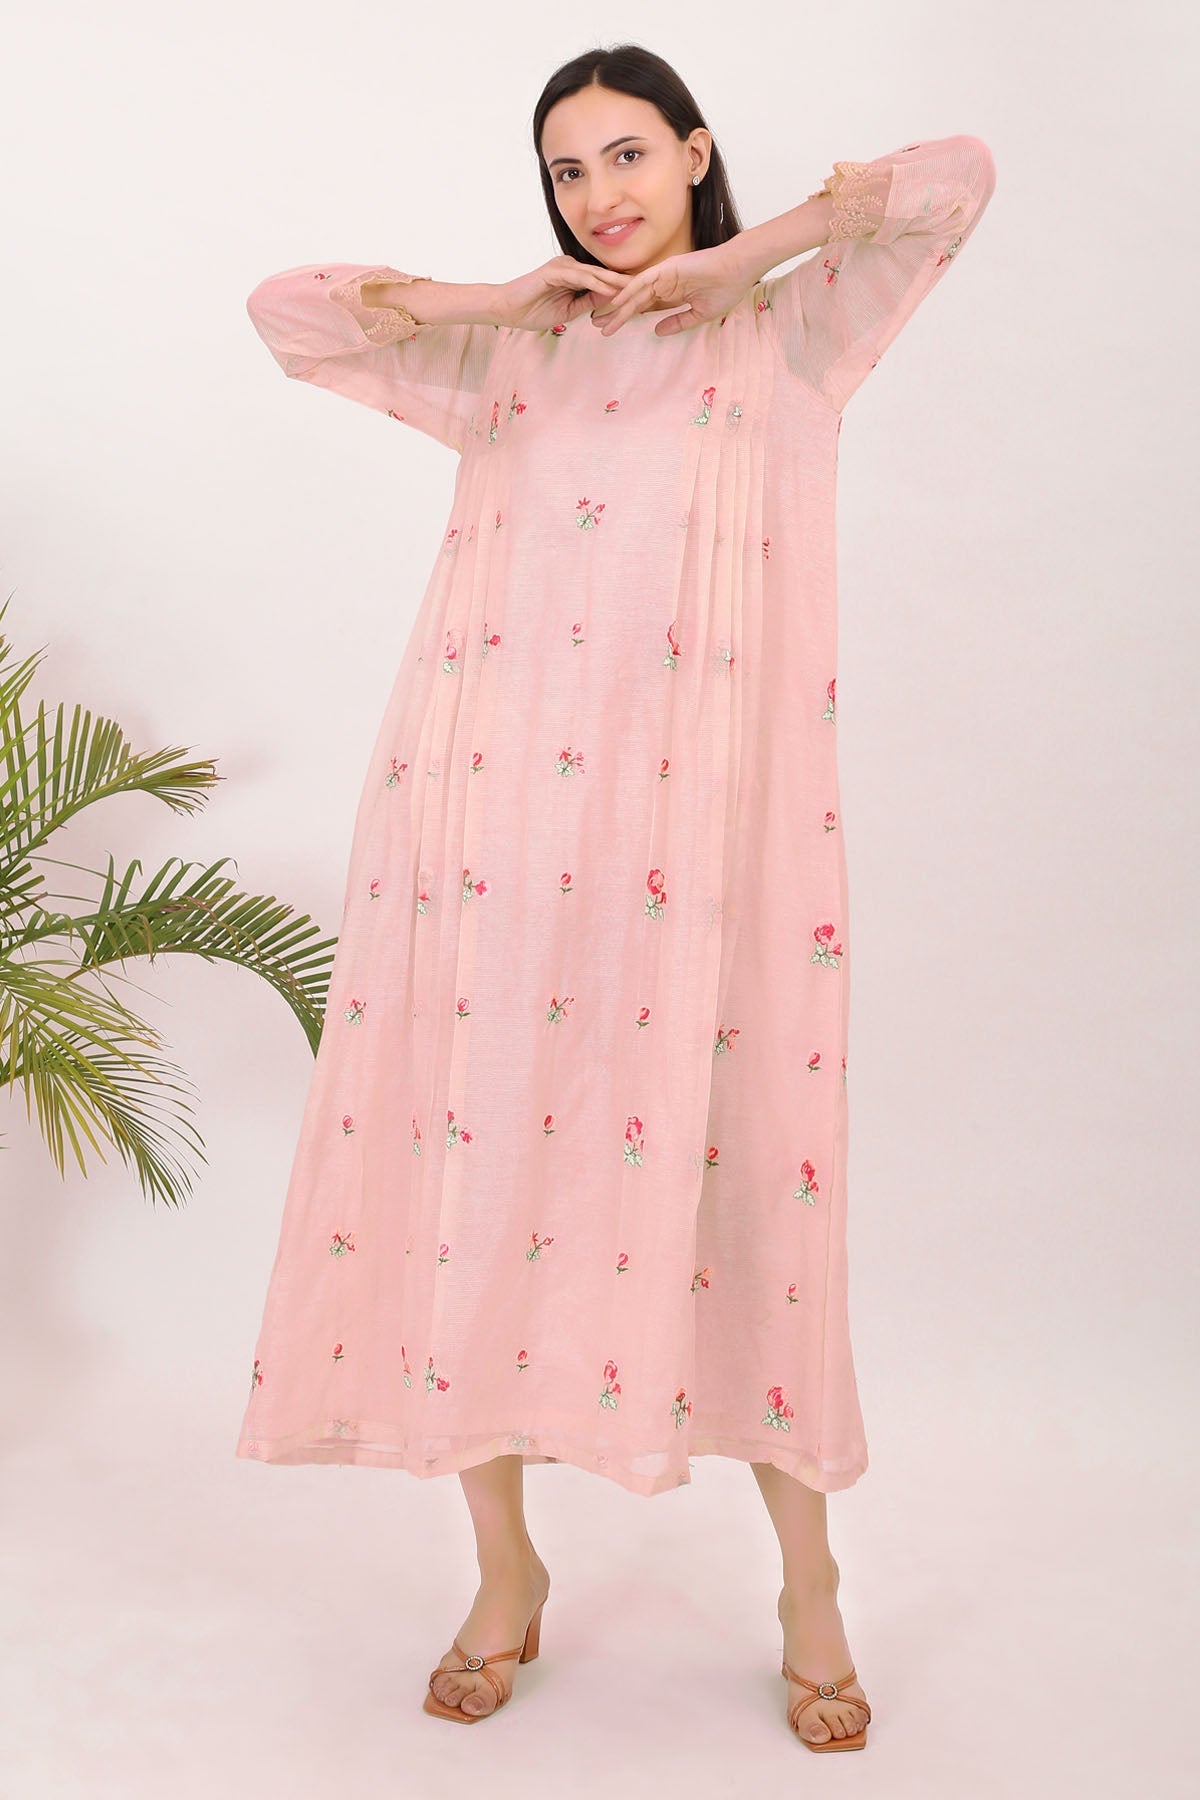 Simply Kitsch Light Pink Embroidered Dress For Women Online At ScrollnShops